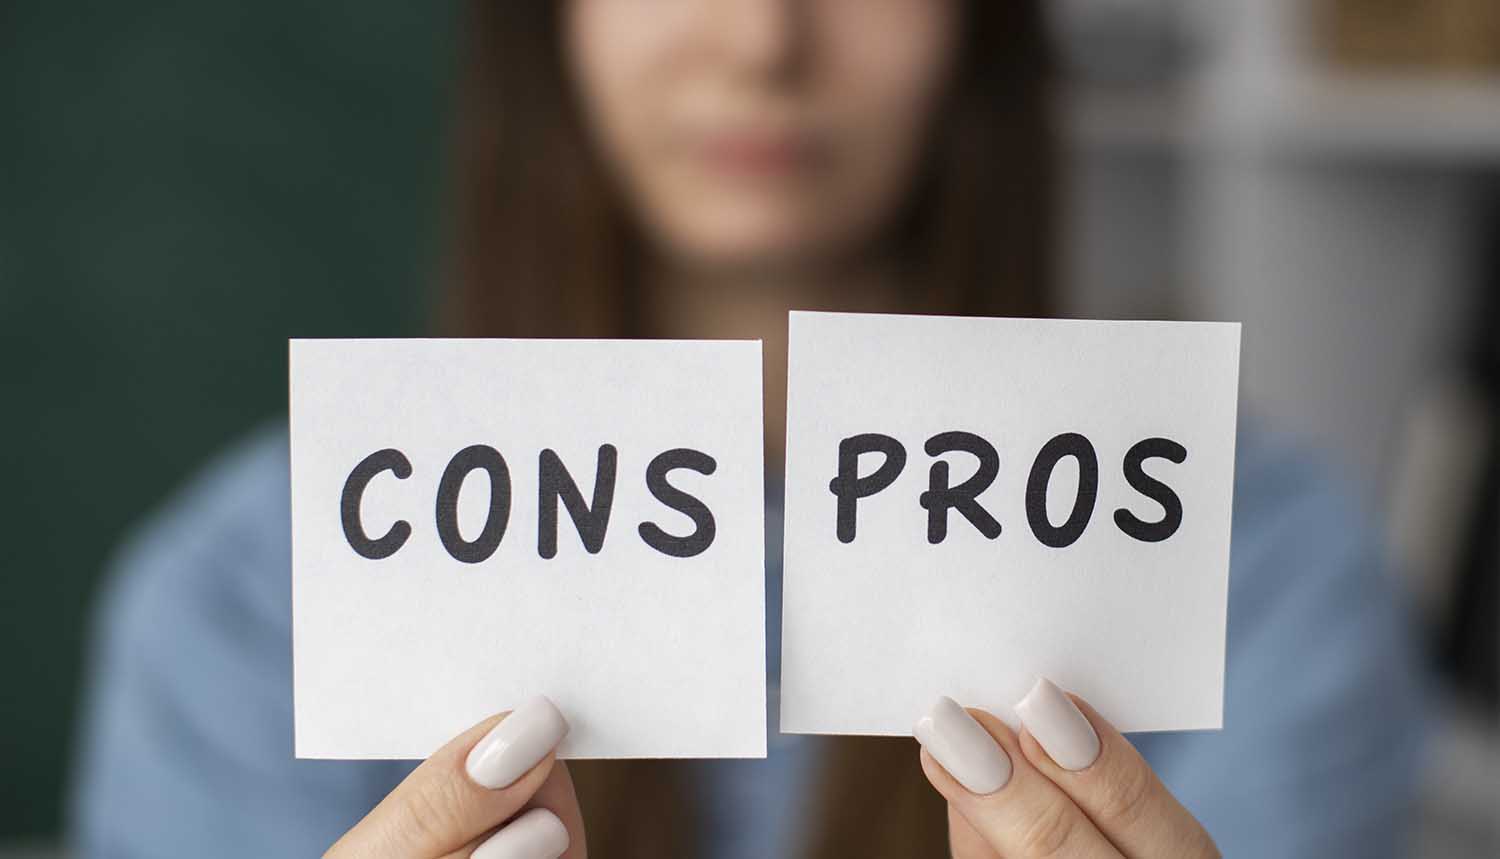 Twitter: Pros and Cons